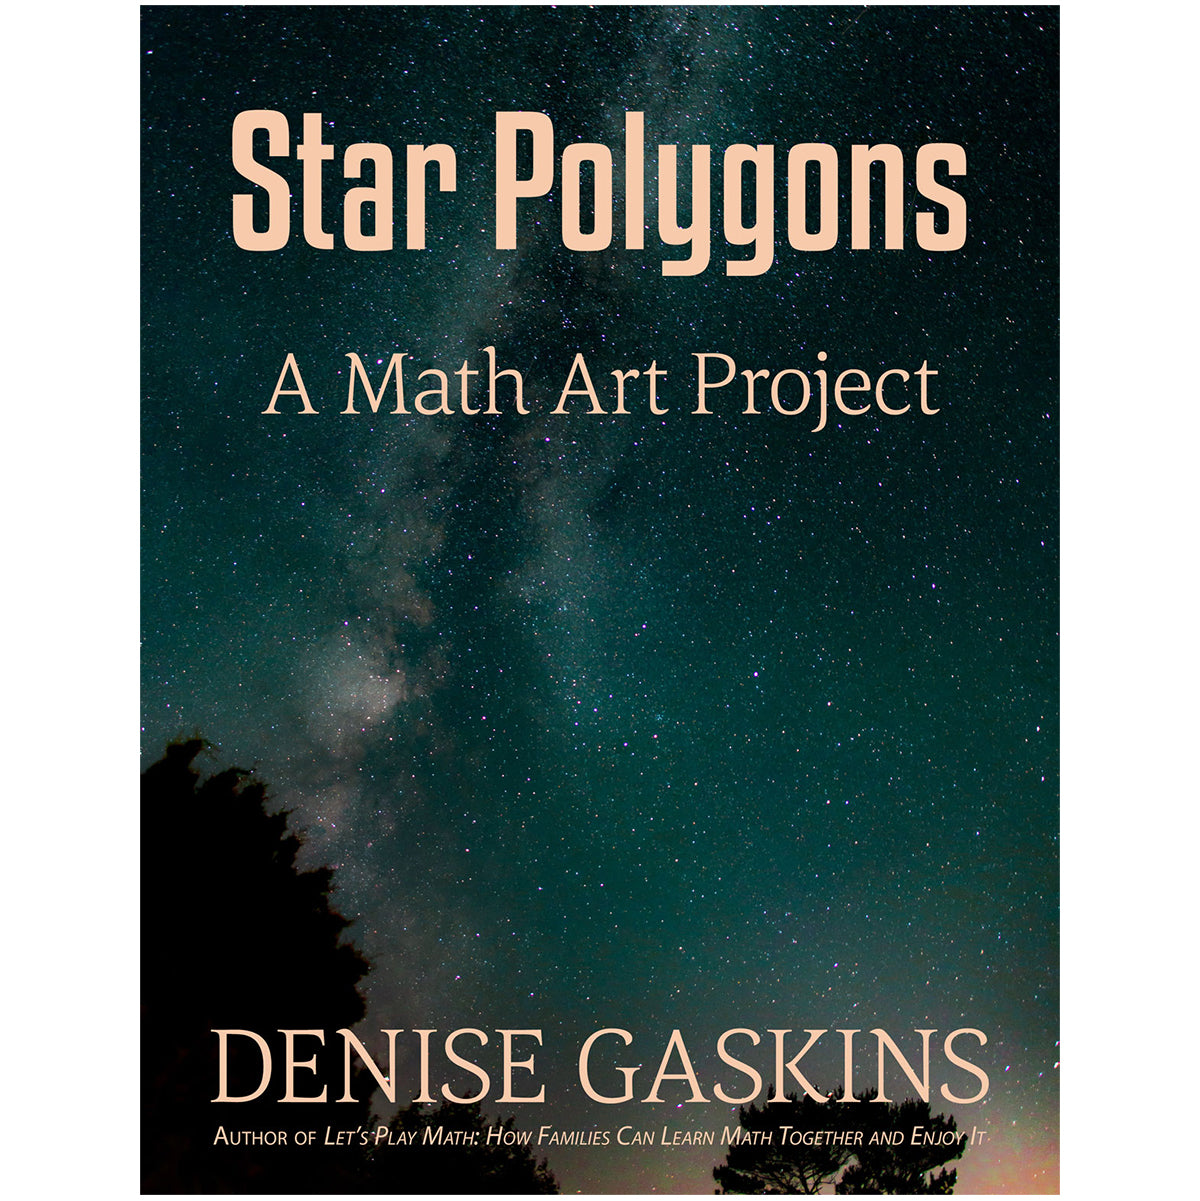 Star Polygons art project printable math activity book by Denise Gaskins